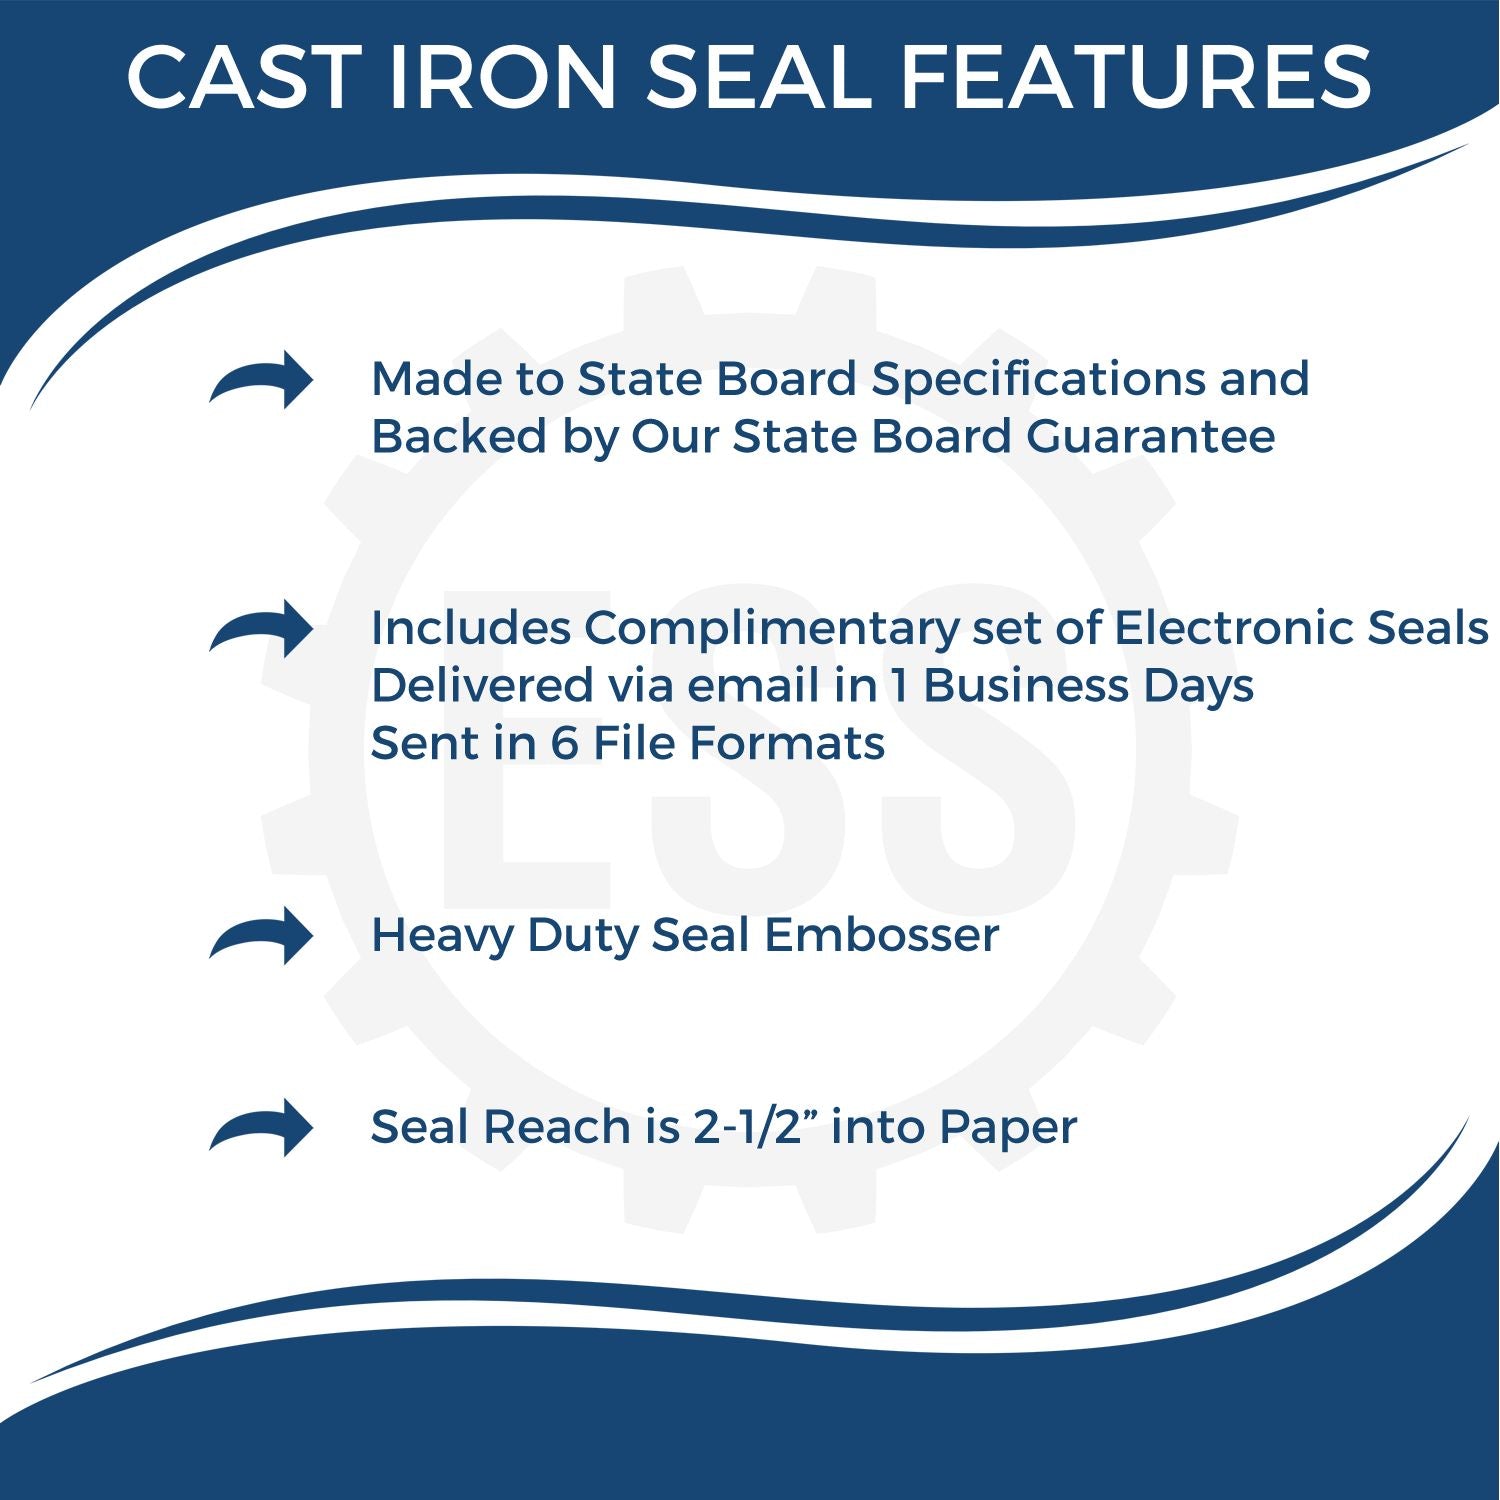 The main image for the Heavy Duty Cast Iron Nebraska Engineer Seal Embosser depicting a sample of the imprint and electronic files